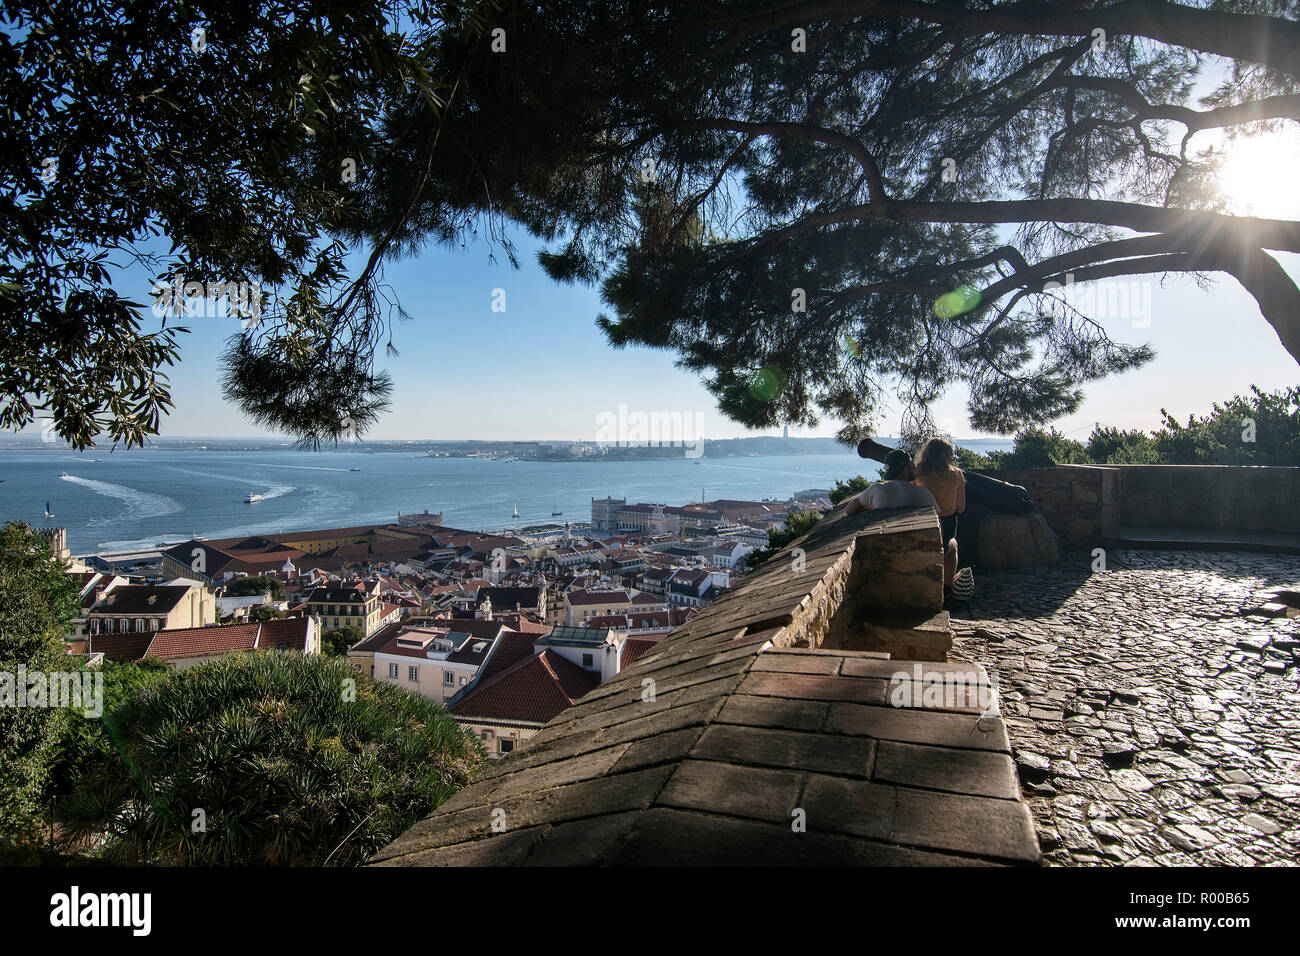 Tourists at the Miradouro do Castelo de Sao Jorge view point in the Alfama district with a view of the city and the Tagus River, Lisbon, Portugal. Stock Photo